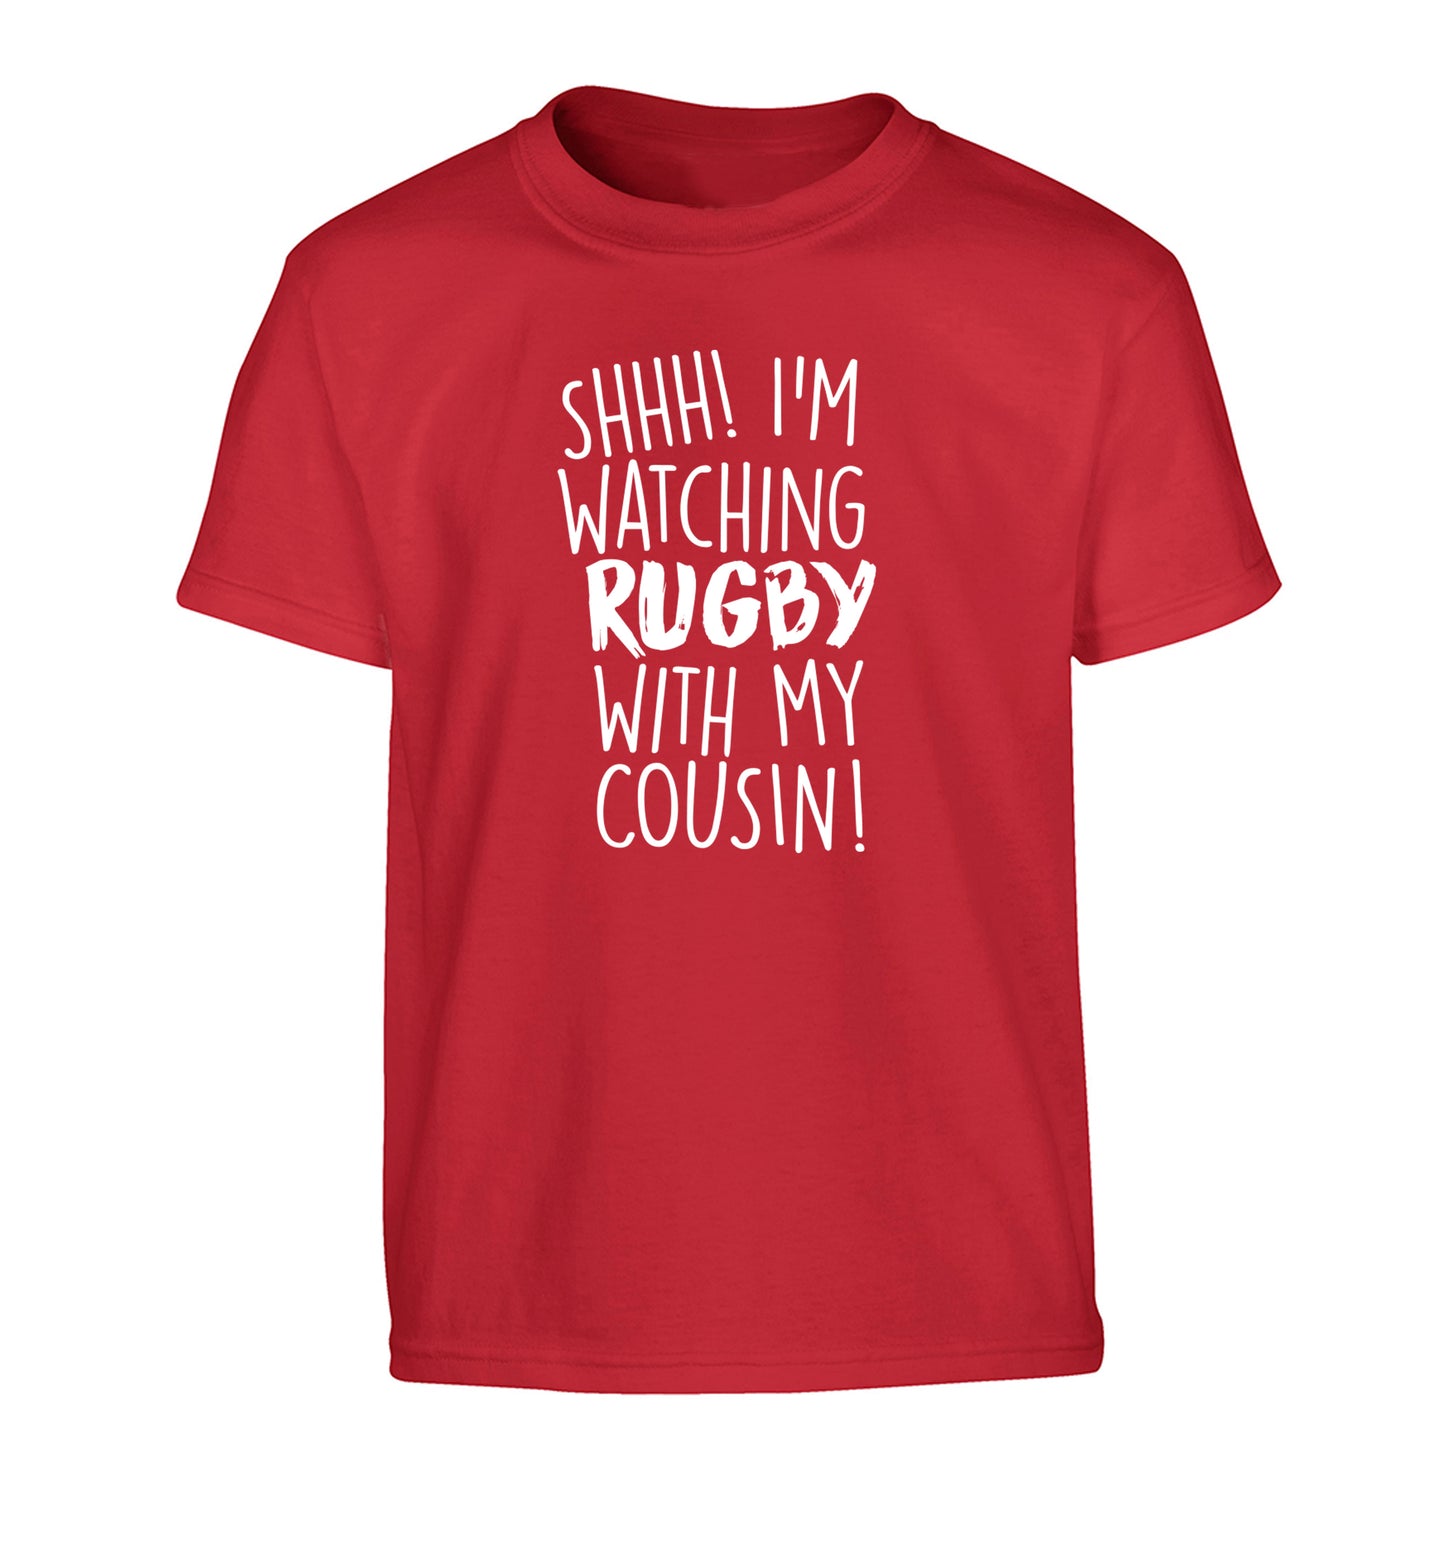 Shhh I'm watching rugby with my cousin Children's red Tshirt 12-13 Years